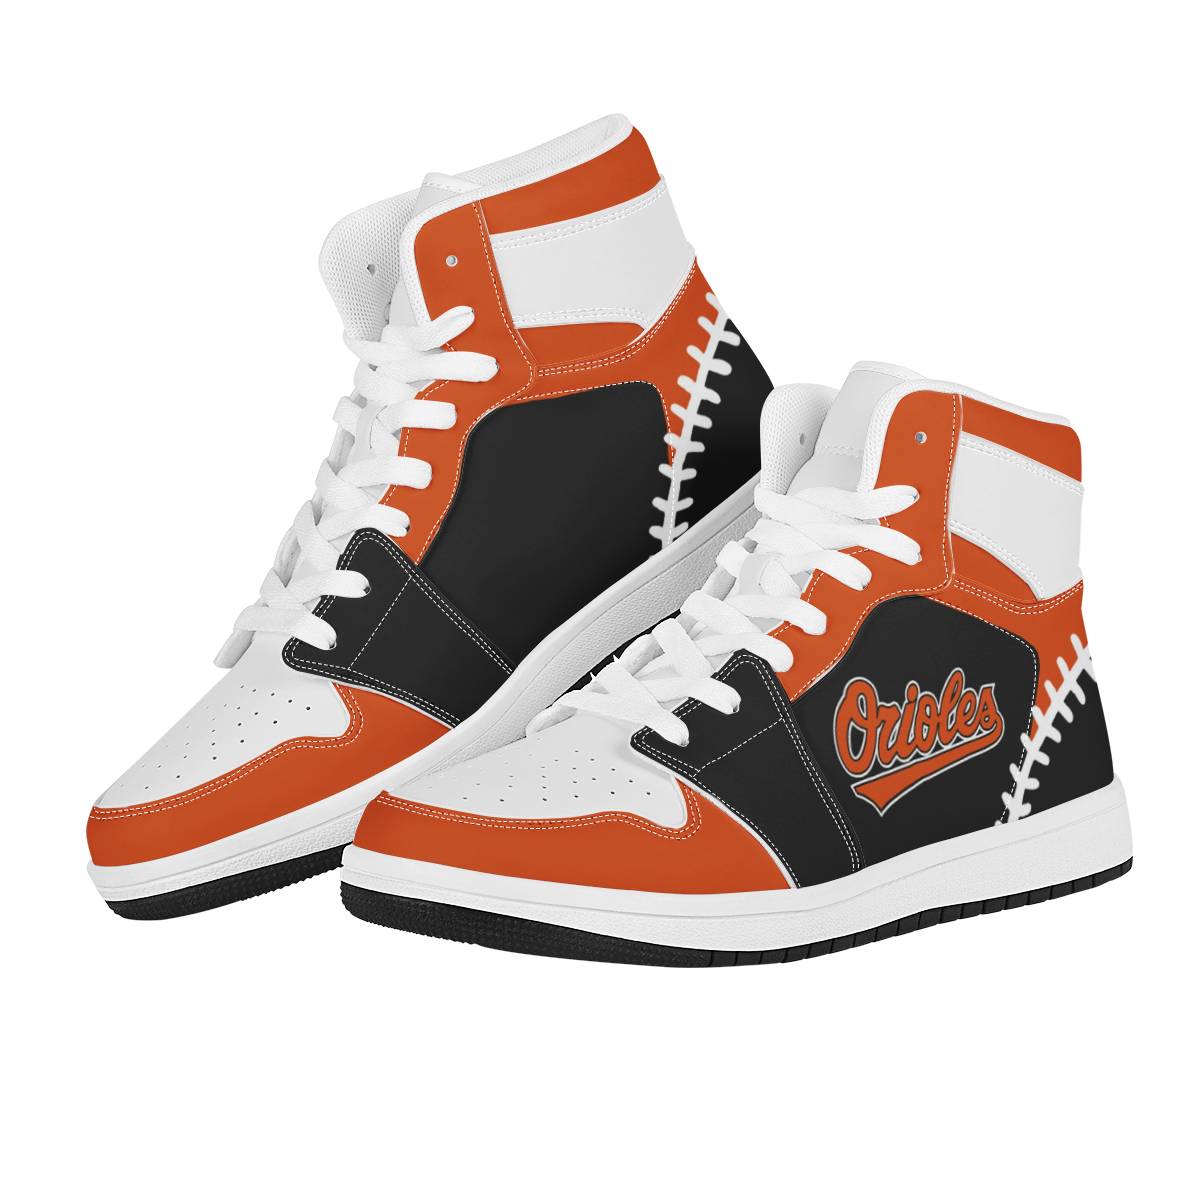 Women's Baltimore Orioles High Top Leather AJ1 Sneakers 002